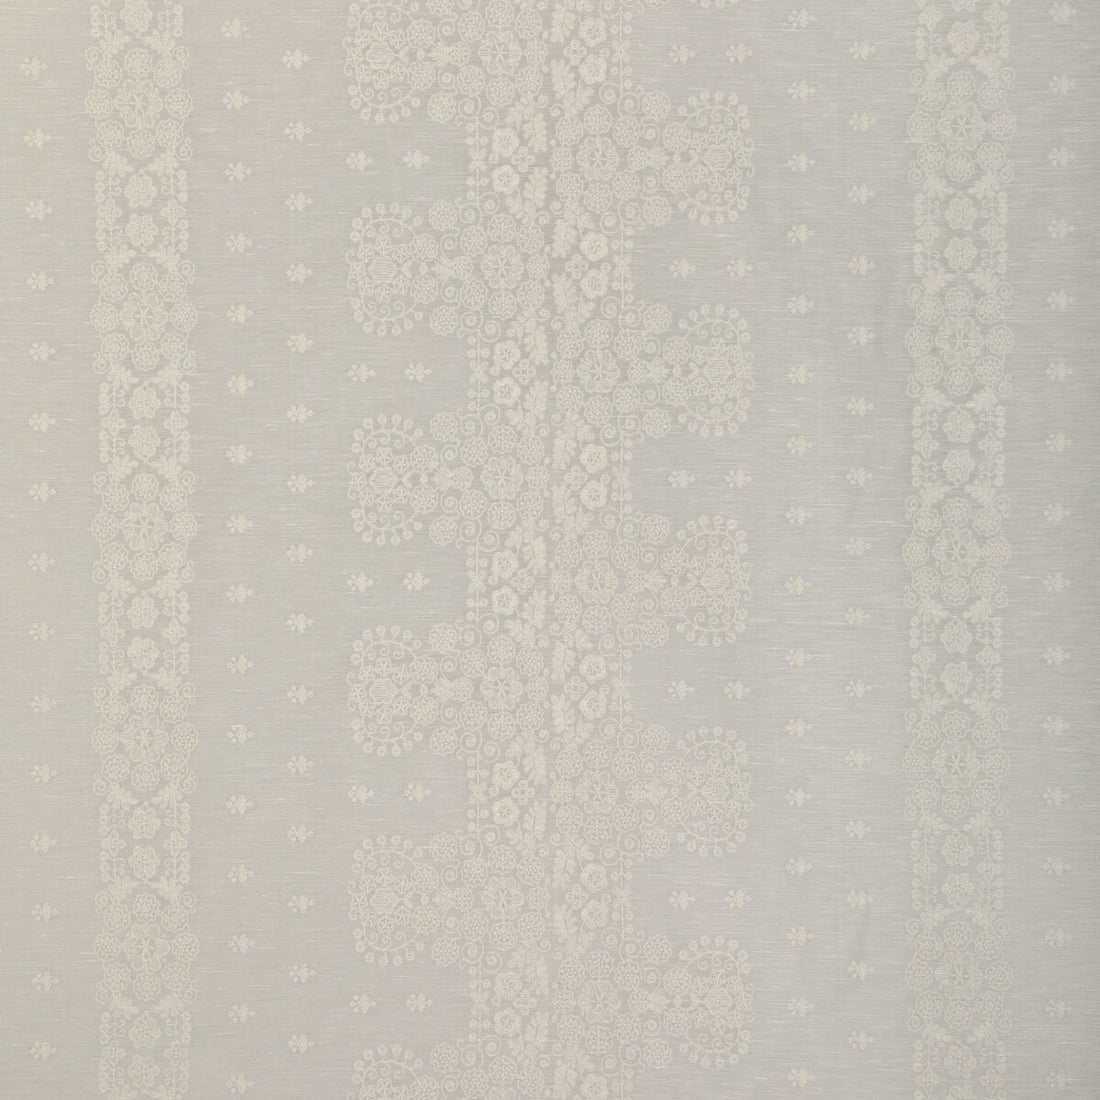 Coulet Sheer fabric in ivory color - pattern 8023109.1.0 - by Brunschwig &amp; Fils in the Anduze Embroideries collection